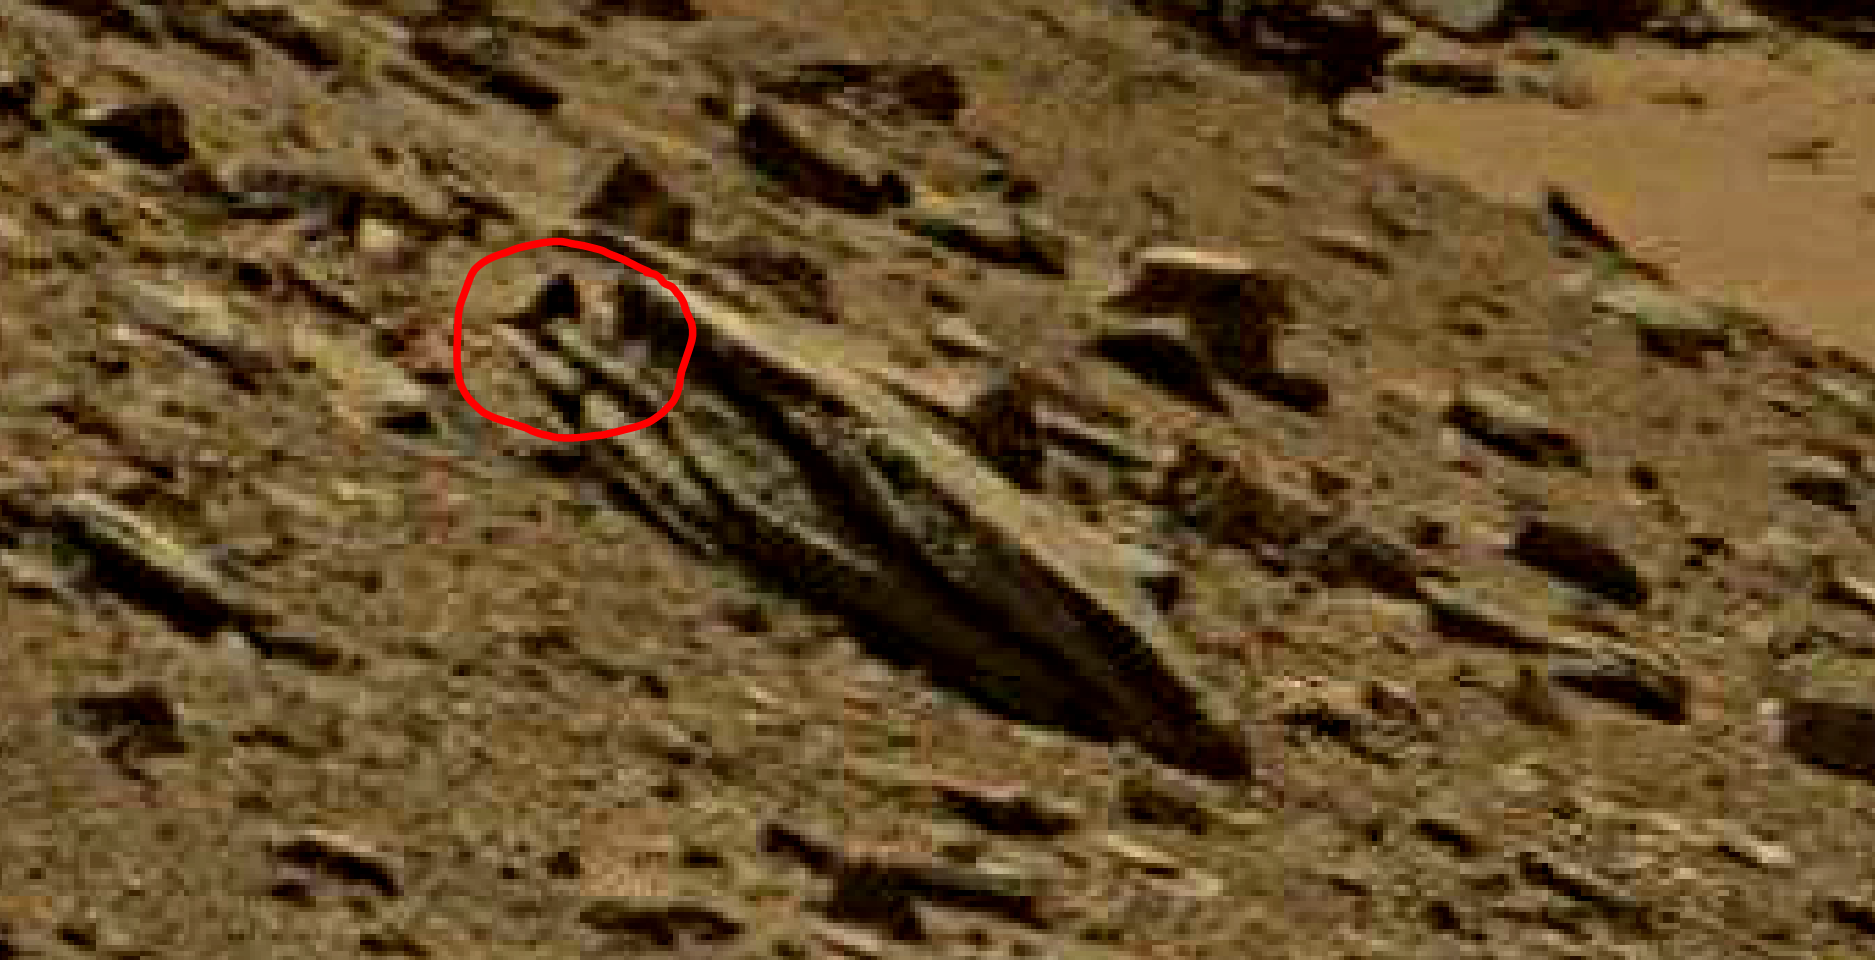 mars sol 1434 anomaly artifacts 1a was life on mars